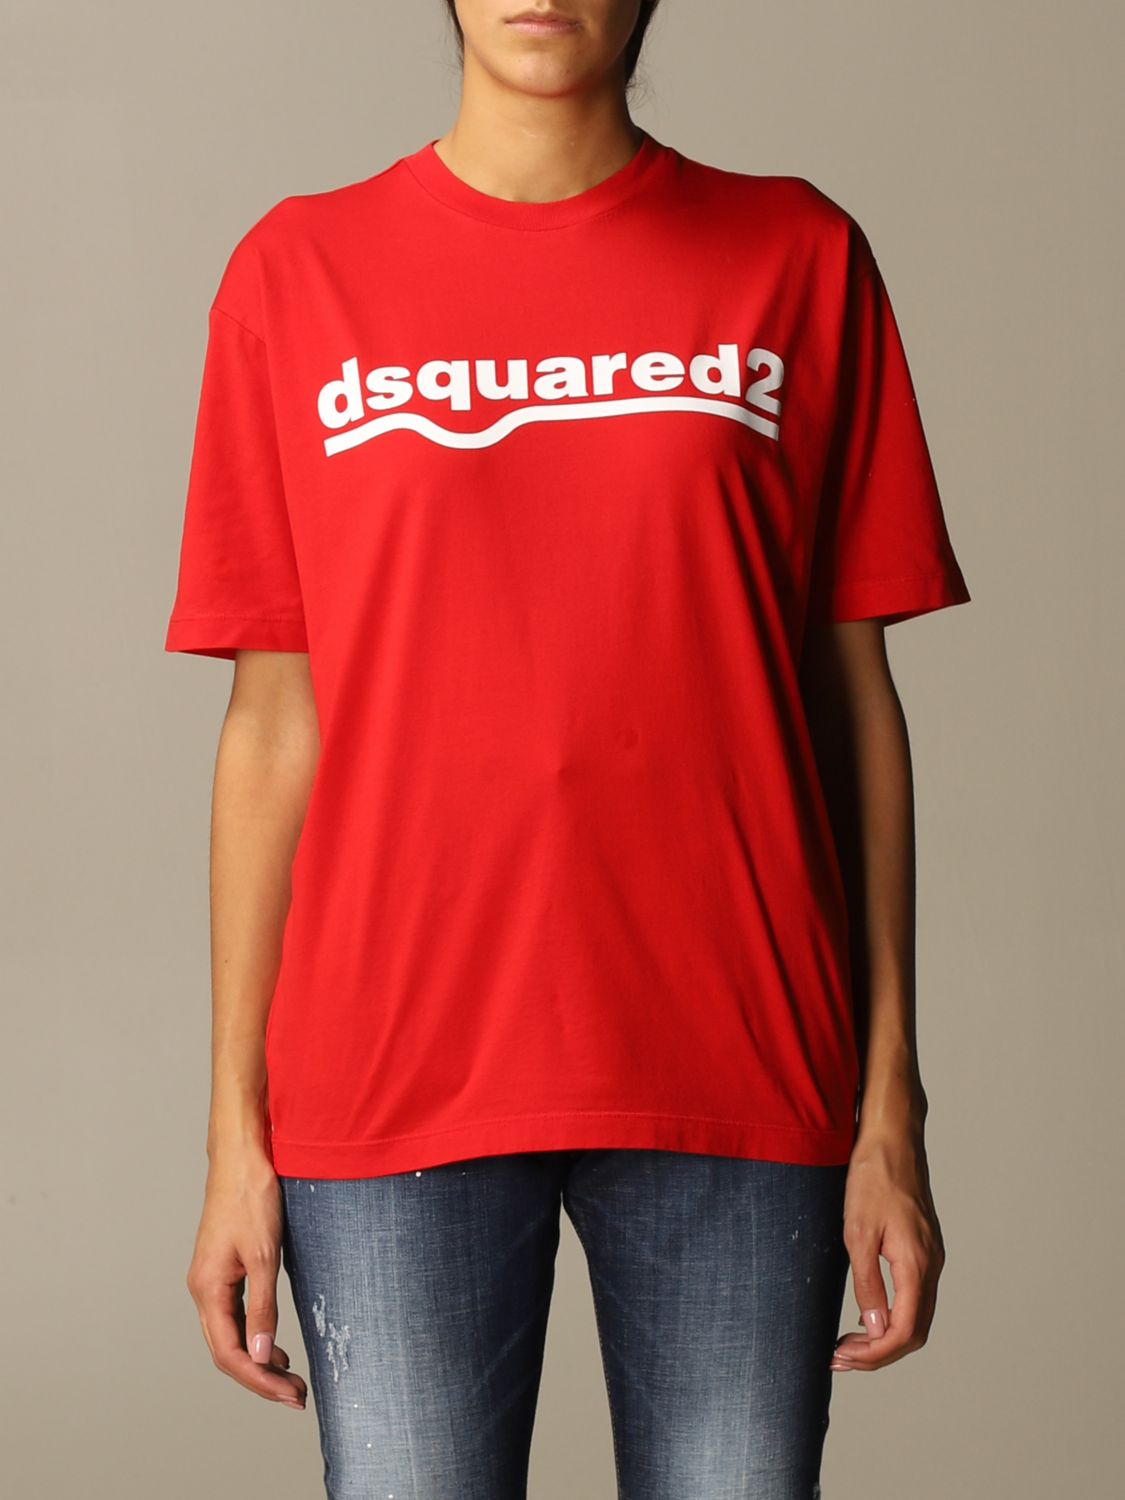 dsquared2 red t shirt